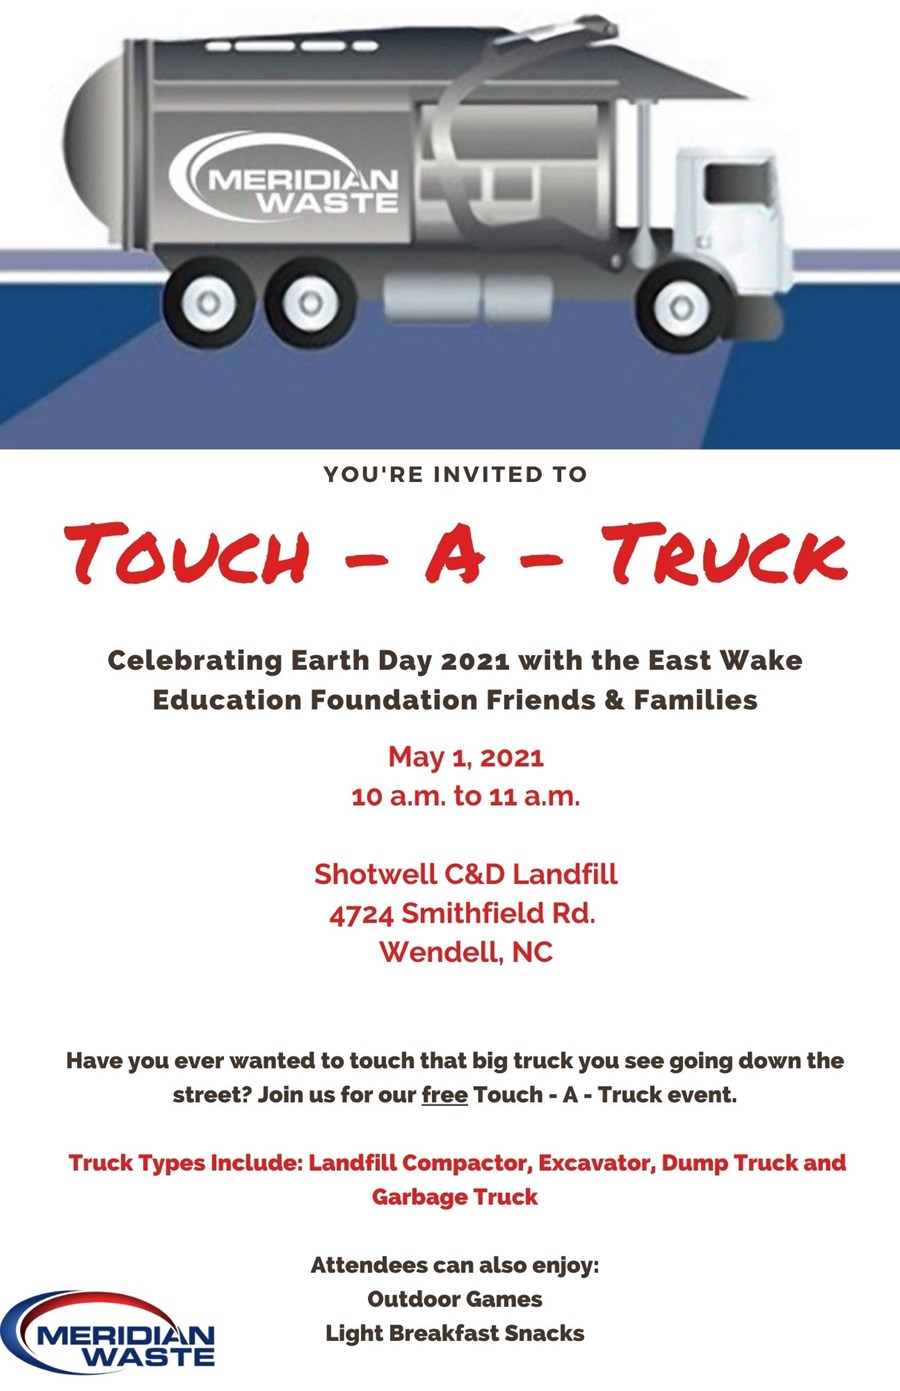 Touch a Truck at Shotwell Landfill